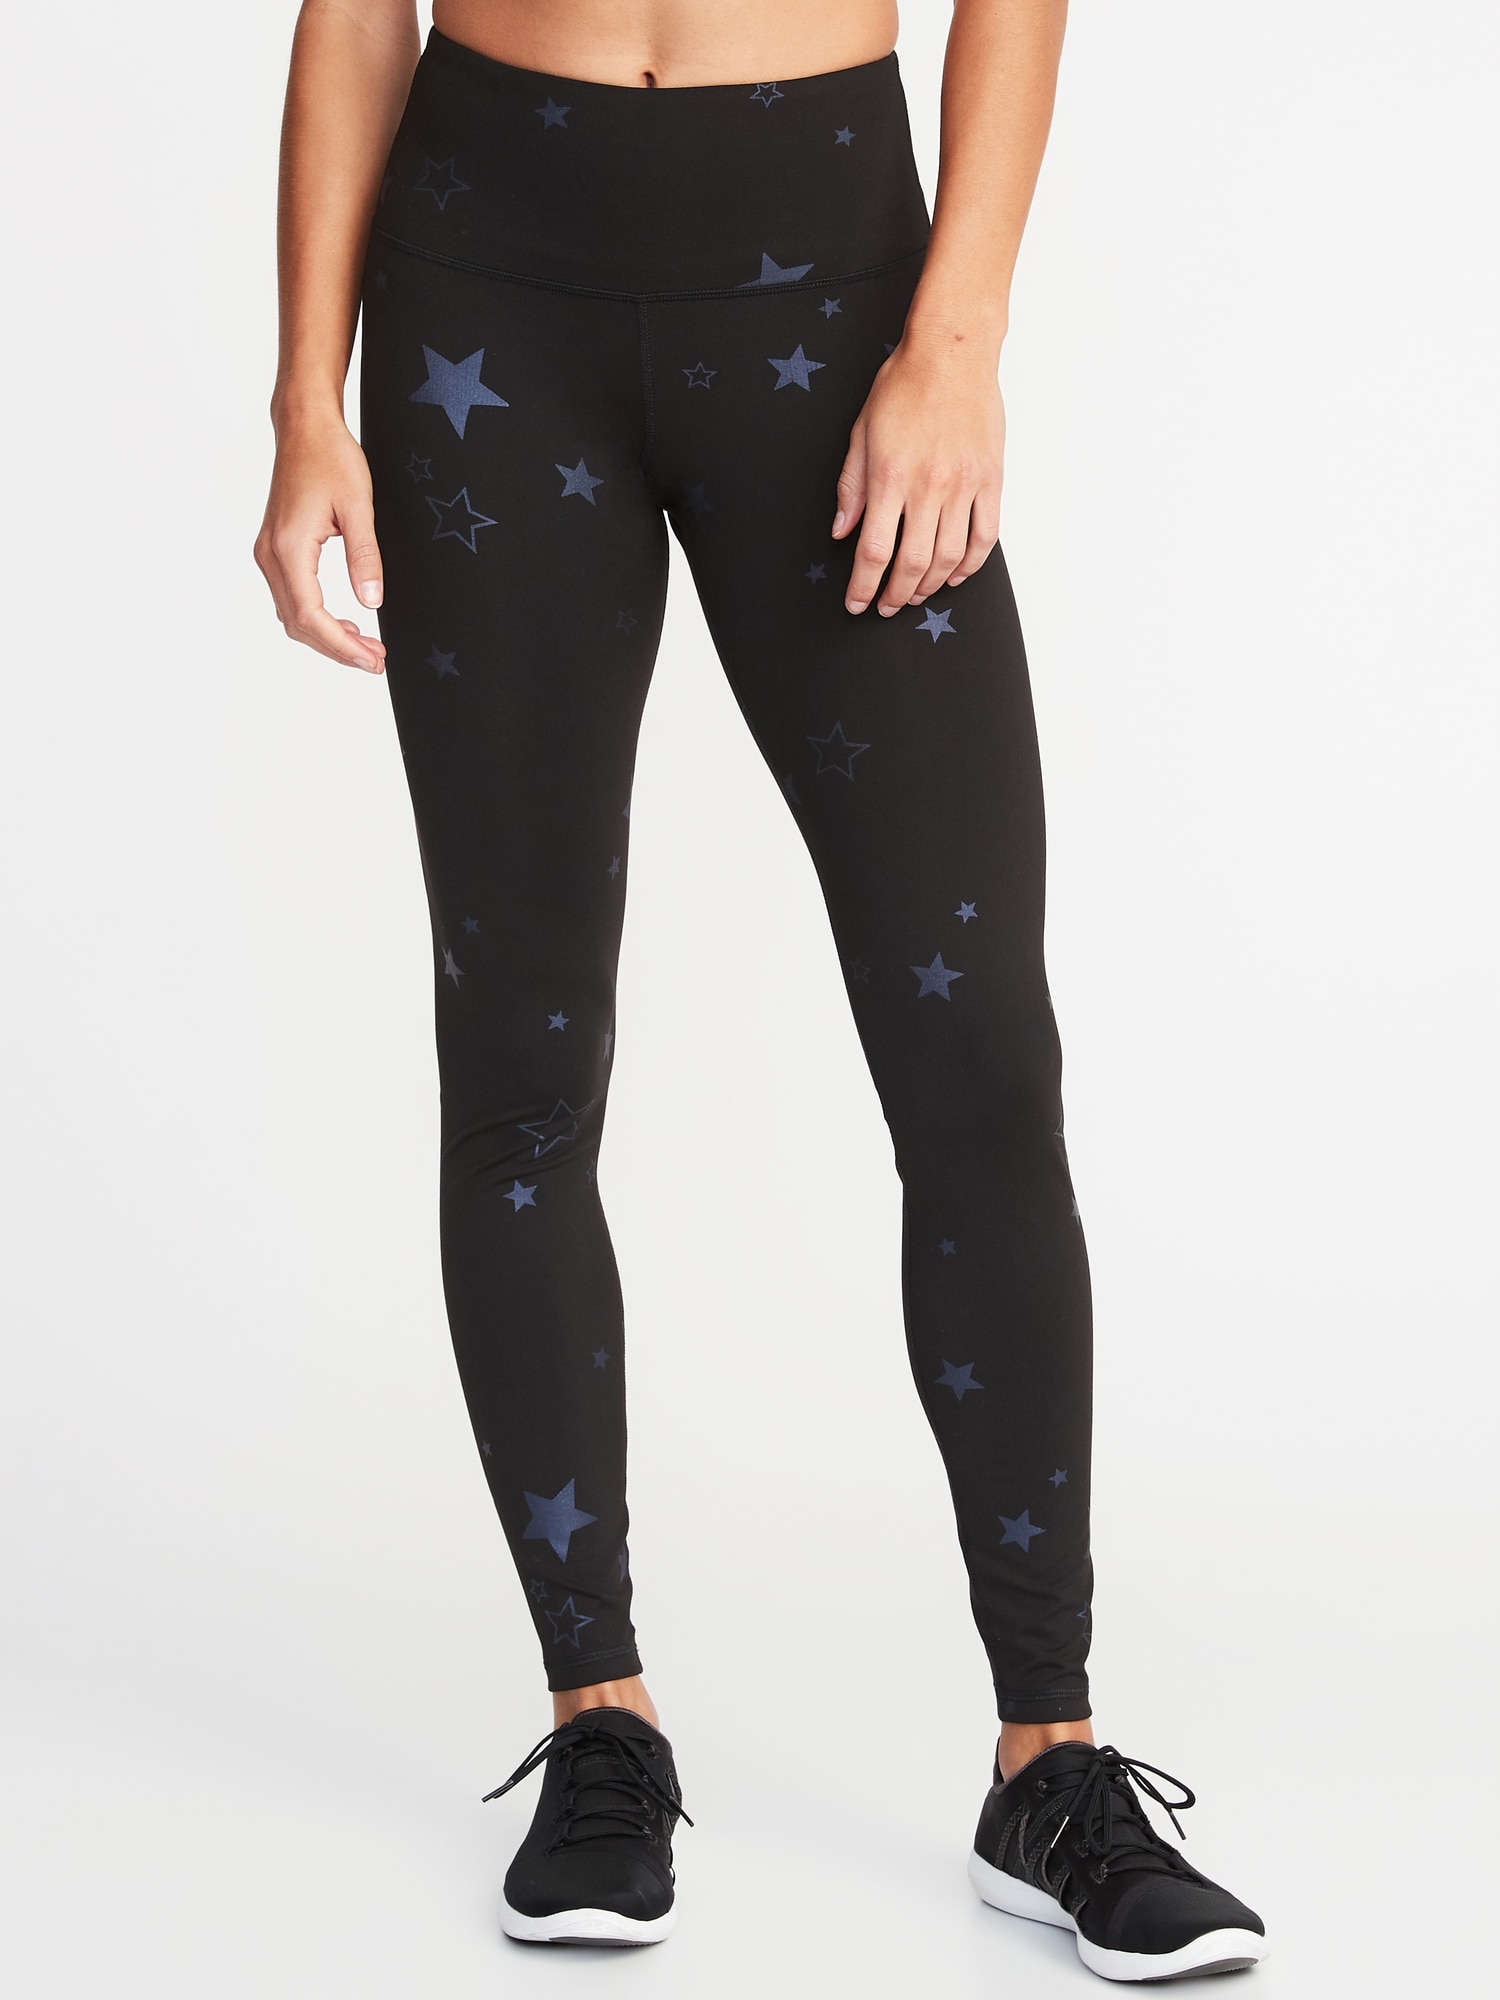 High-Waisted Elevate Straight Compression Pants For Women, Old Navy